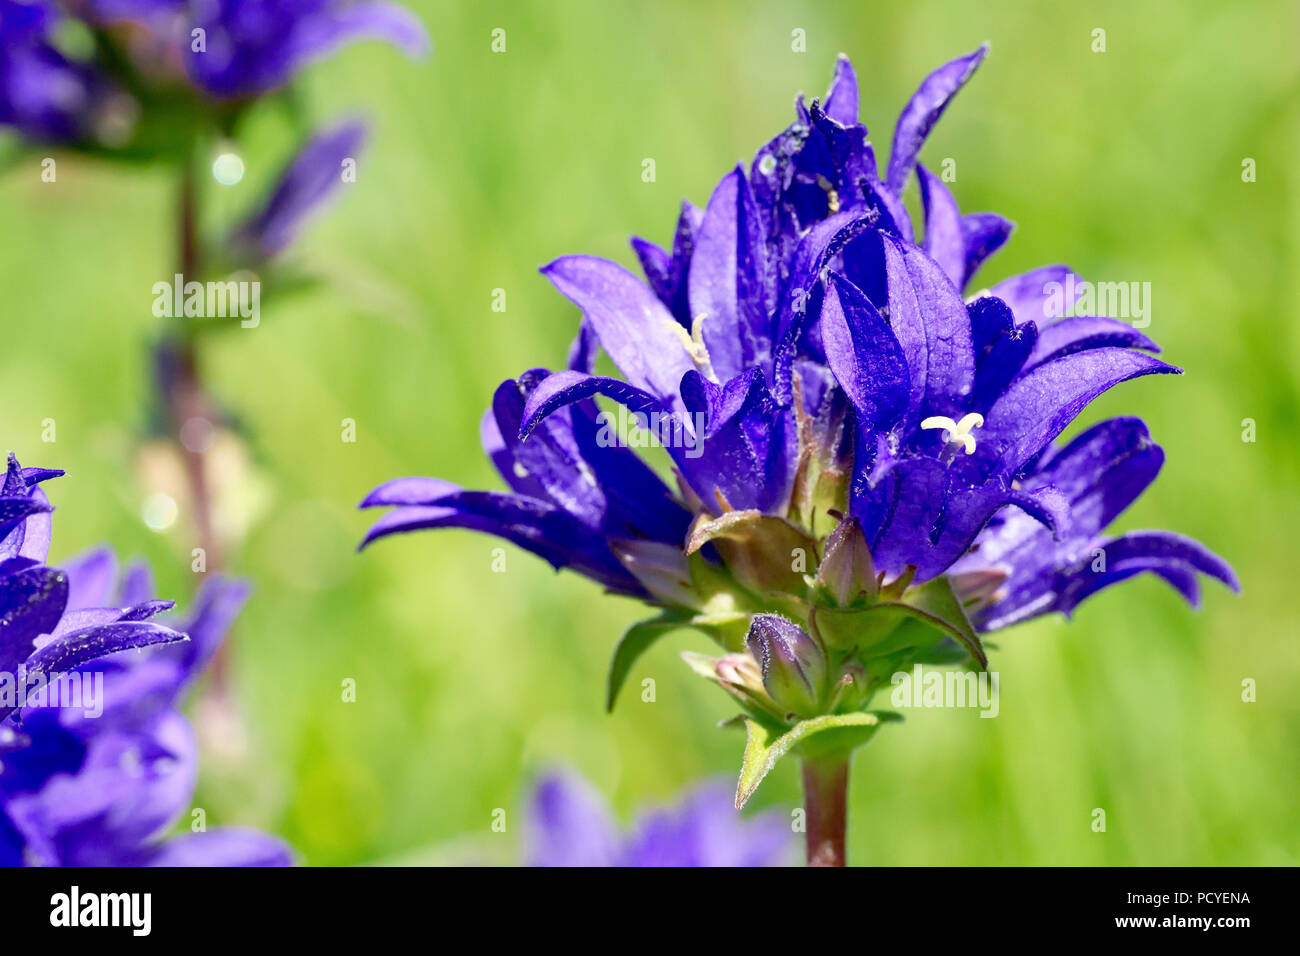 Clustered Bellflower (campanula glomerata), close up of one flower head out of many. Stock Photo